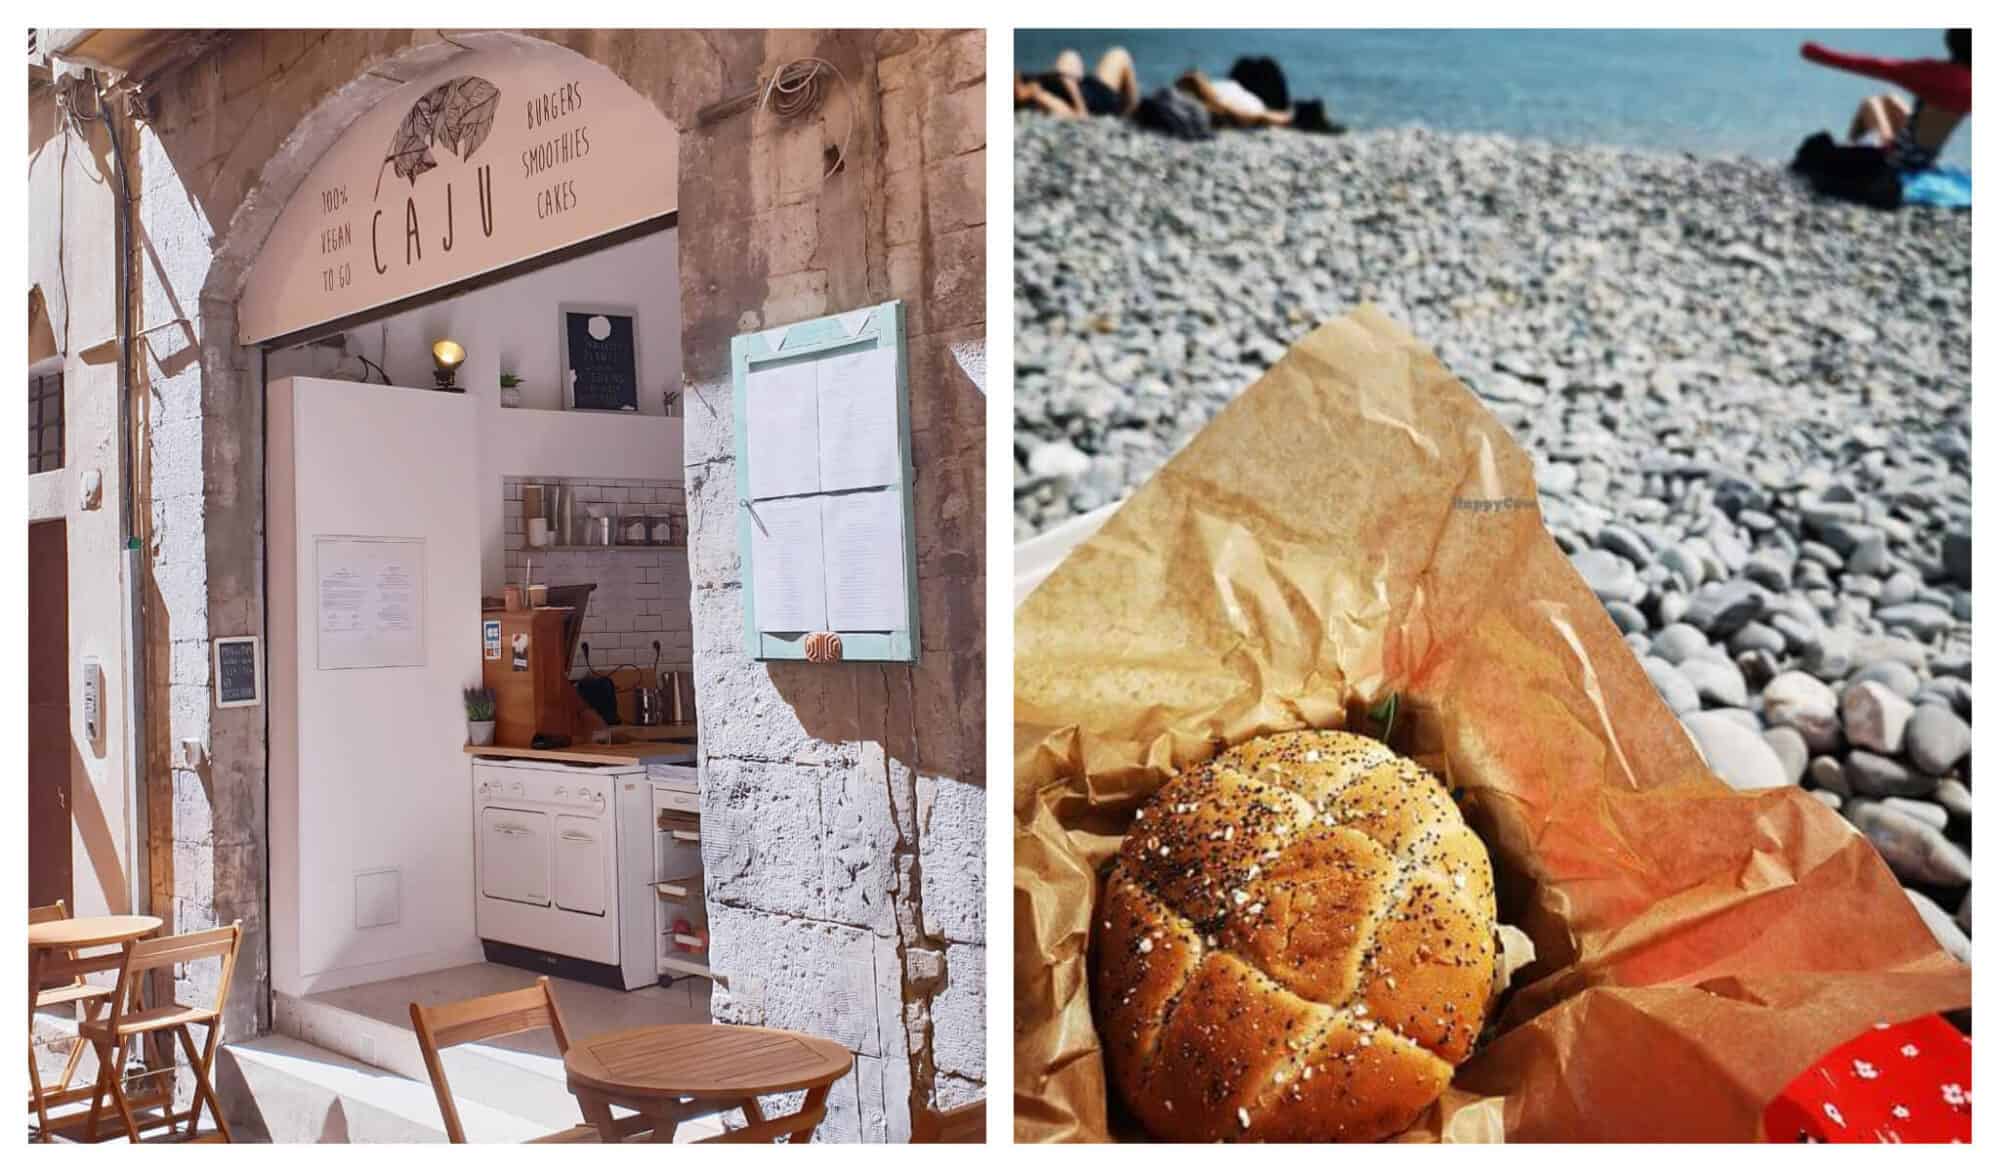 Left: A view of Caju restaurant from the exterior with wooden tables in front. Right: Sitting on a rocky beach in Nice with a view of the water in the background, someone holds a sandwich wrapped in brown paper from Caju restaurant.